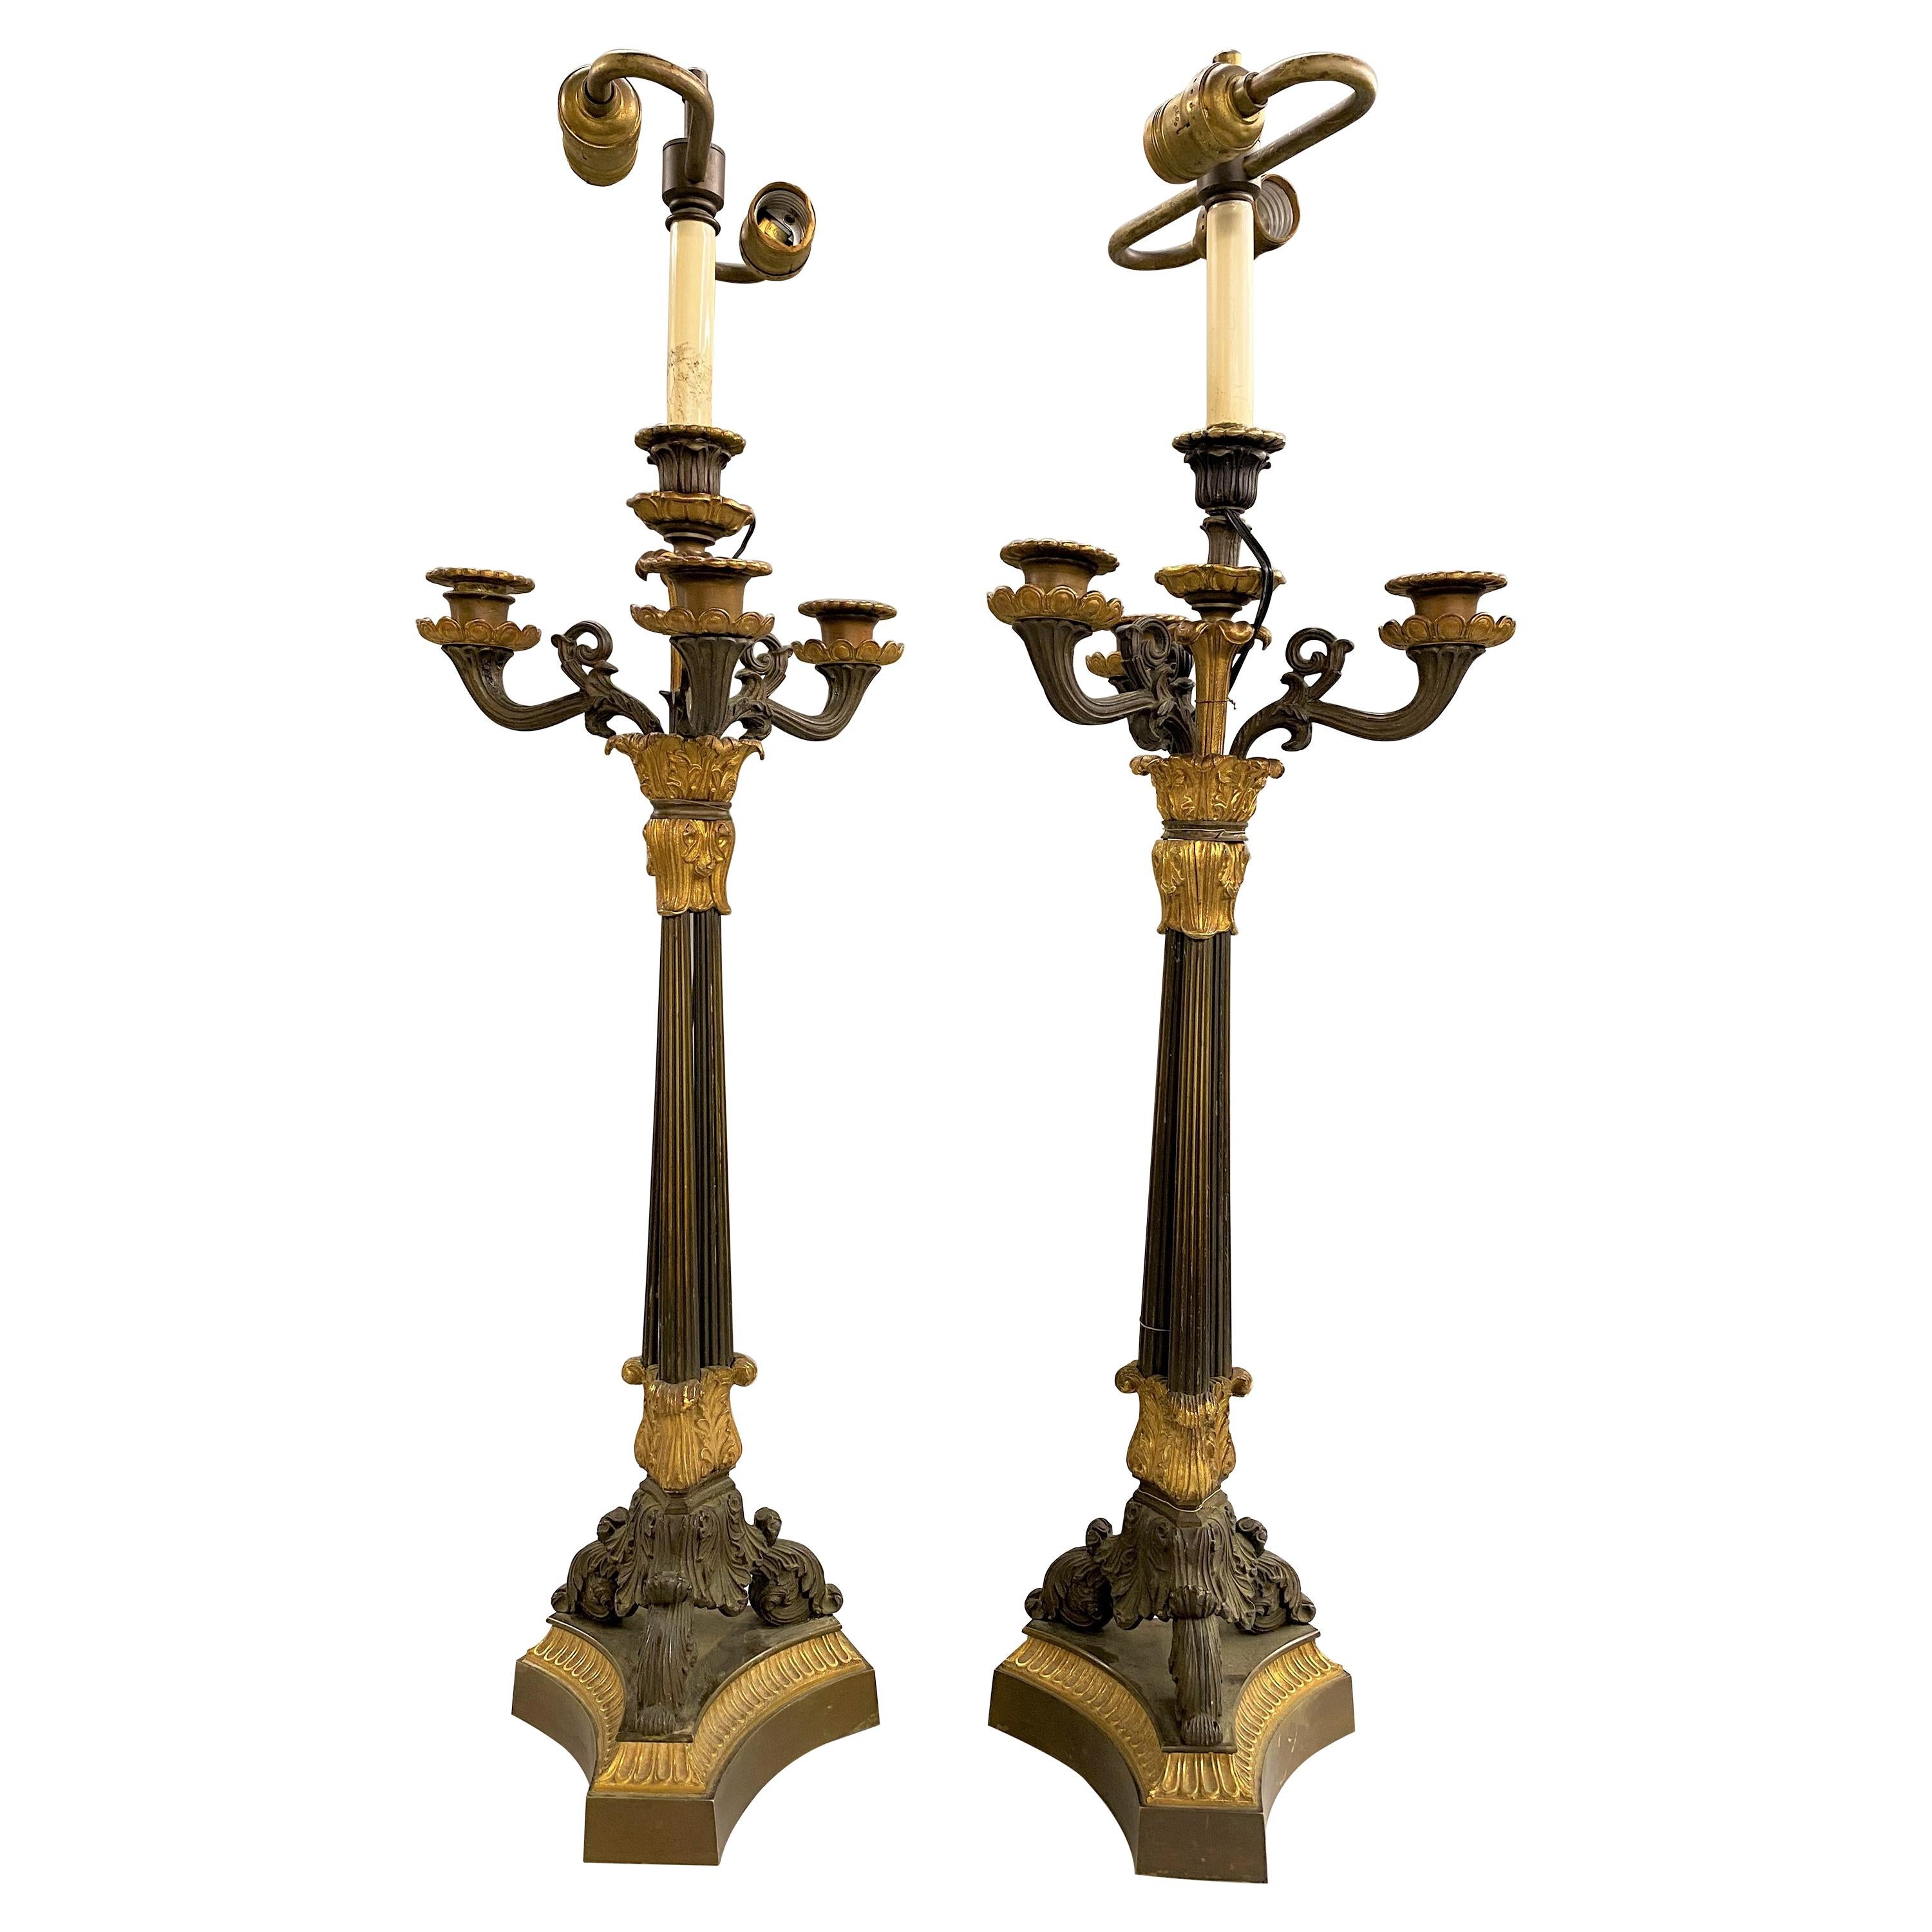 Pair of French Empire Bronze Candelabra Lamps with Ormolu